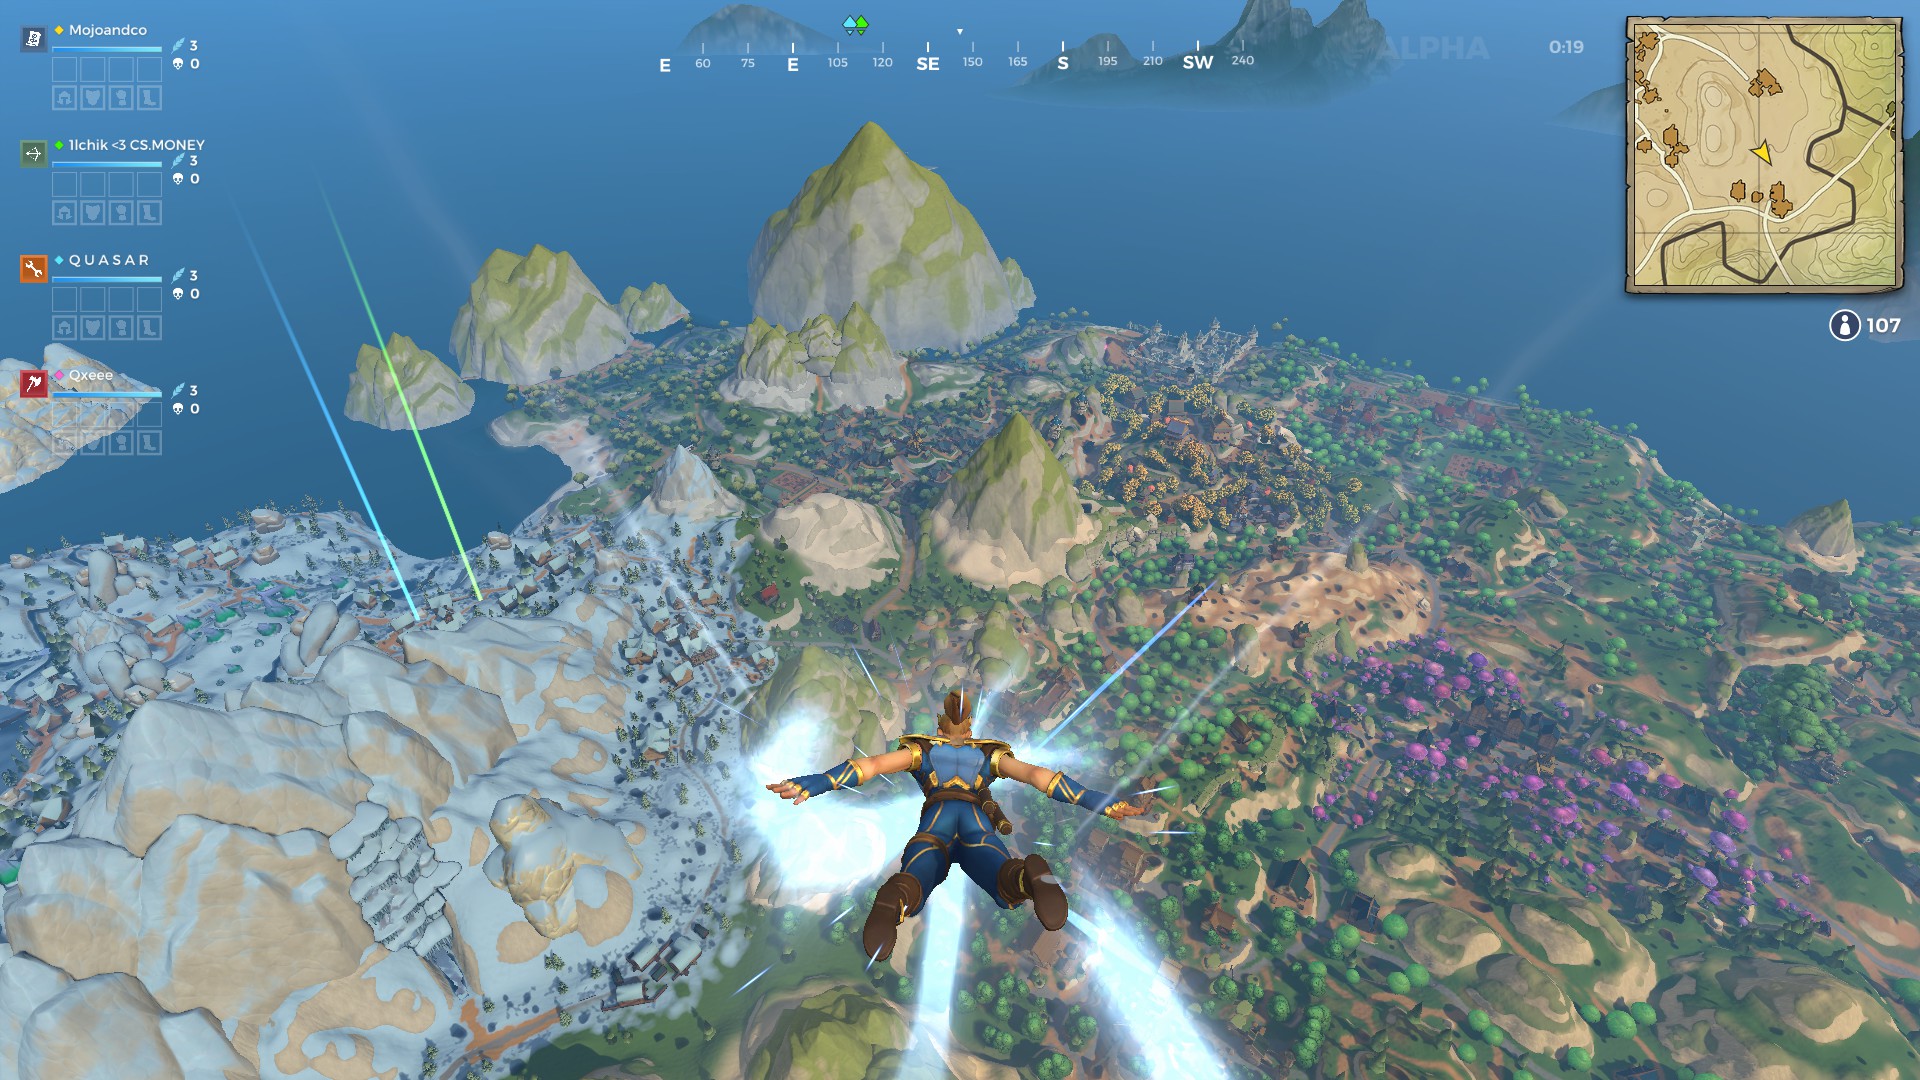 Will Realm Royale Release on PS4 and Xbox One?